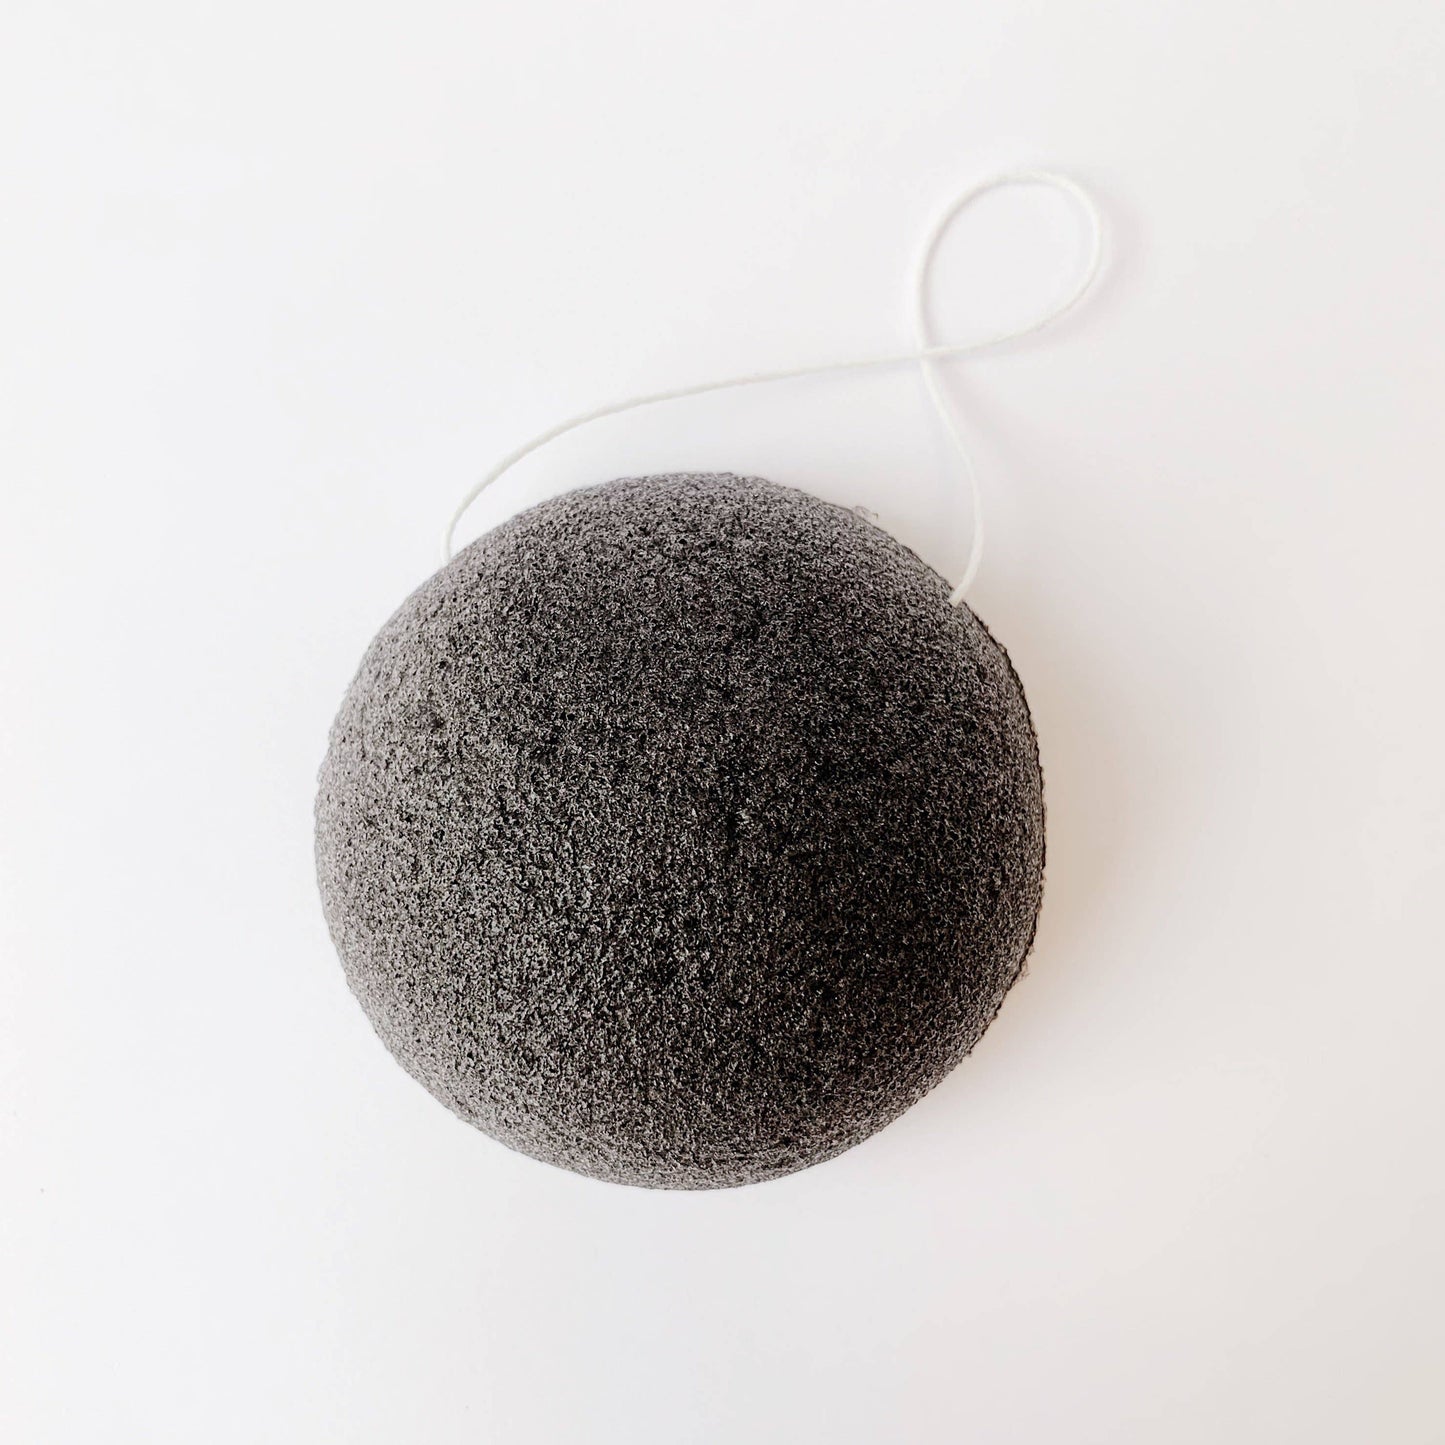 Top view. black konjac sponge with hanging string.  exfoliate gently.  conjac plant and carbon